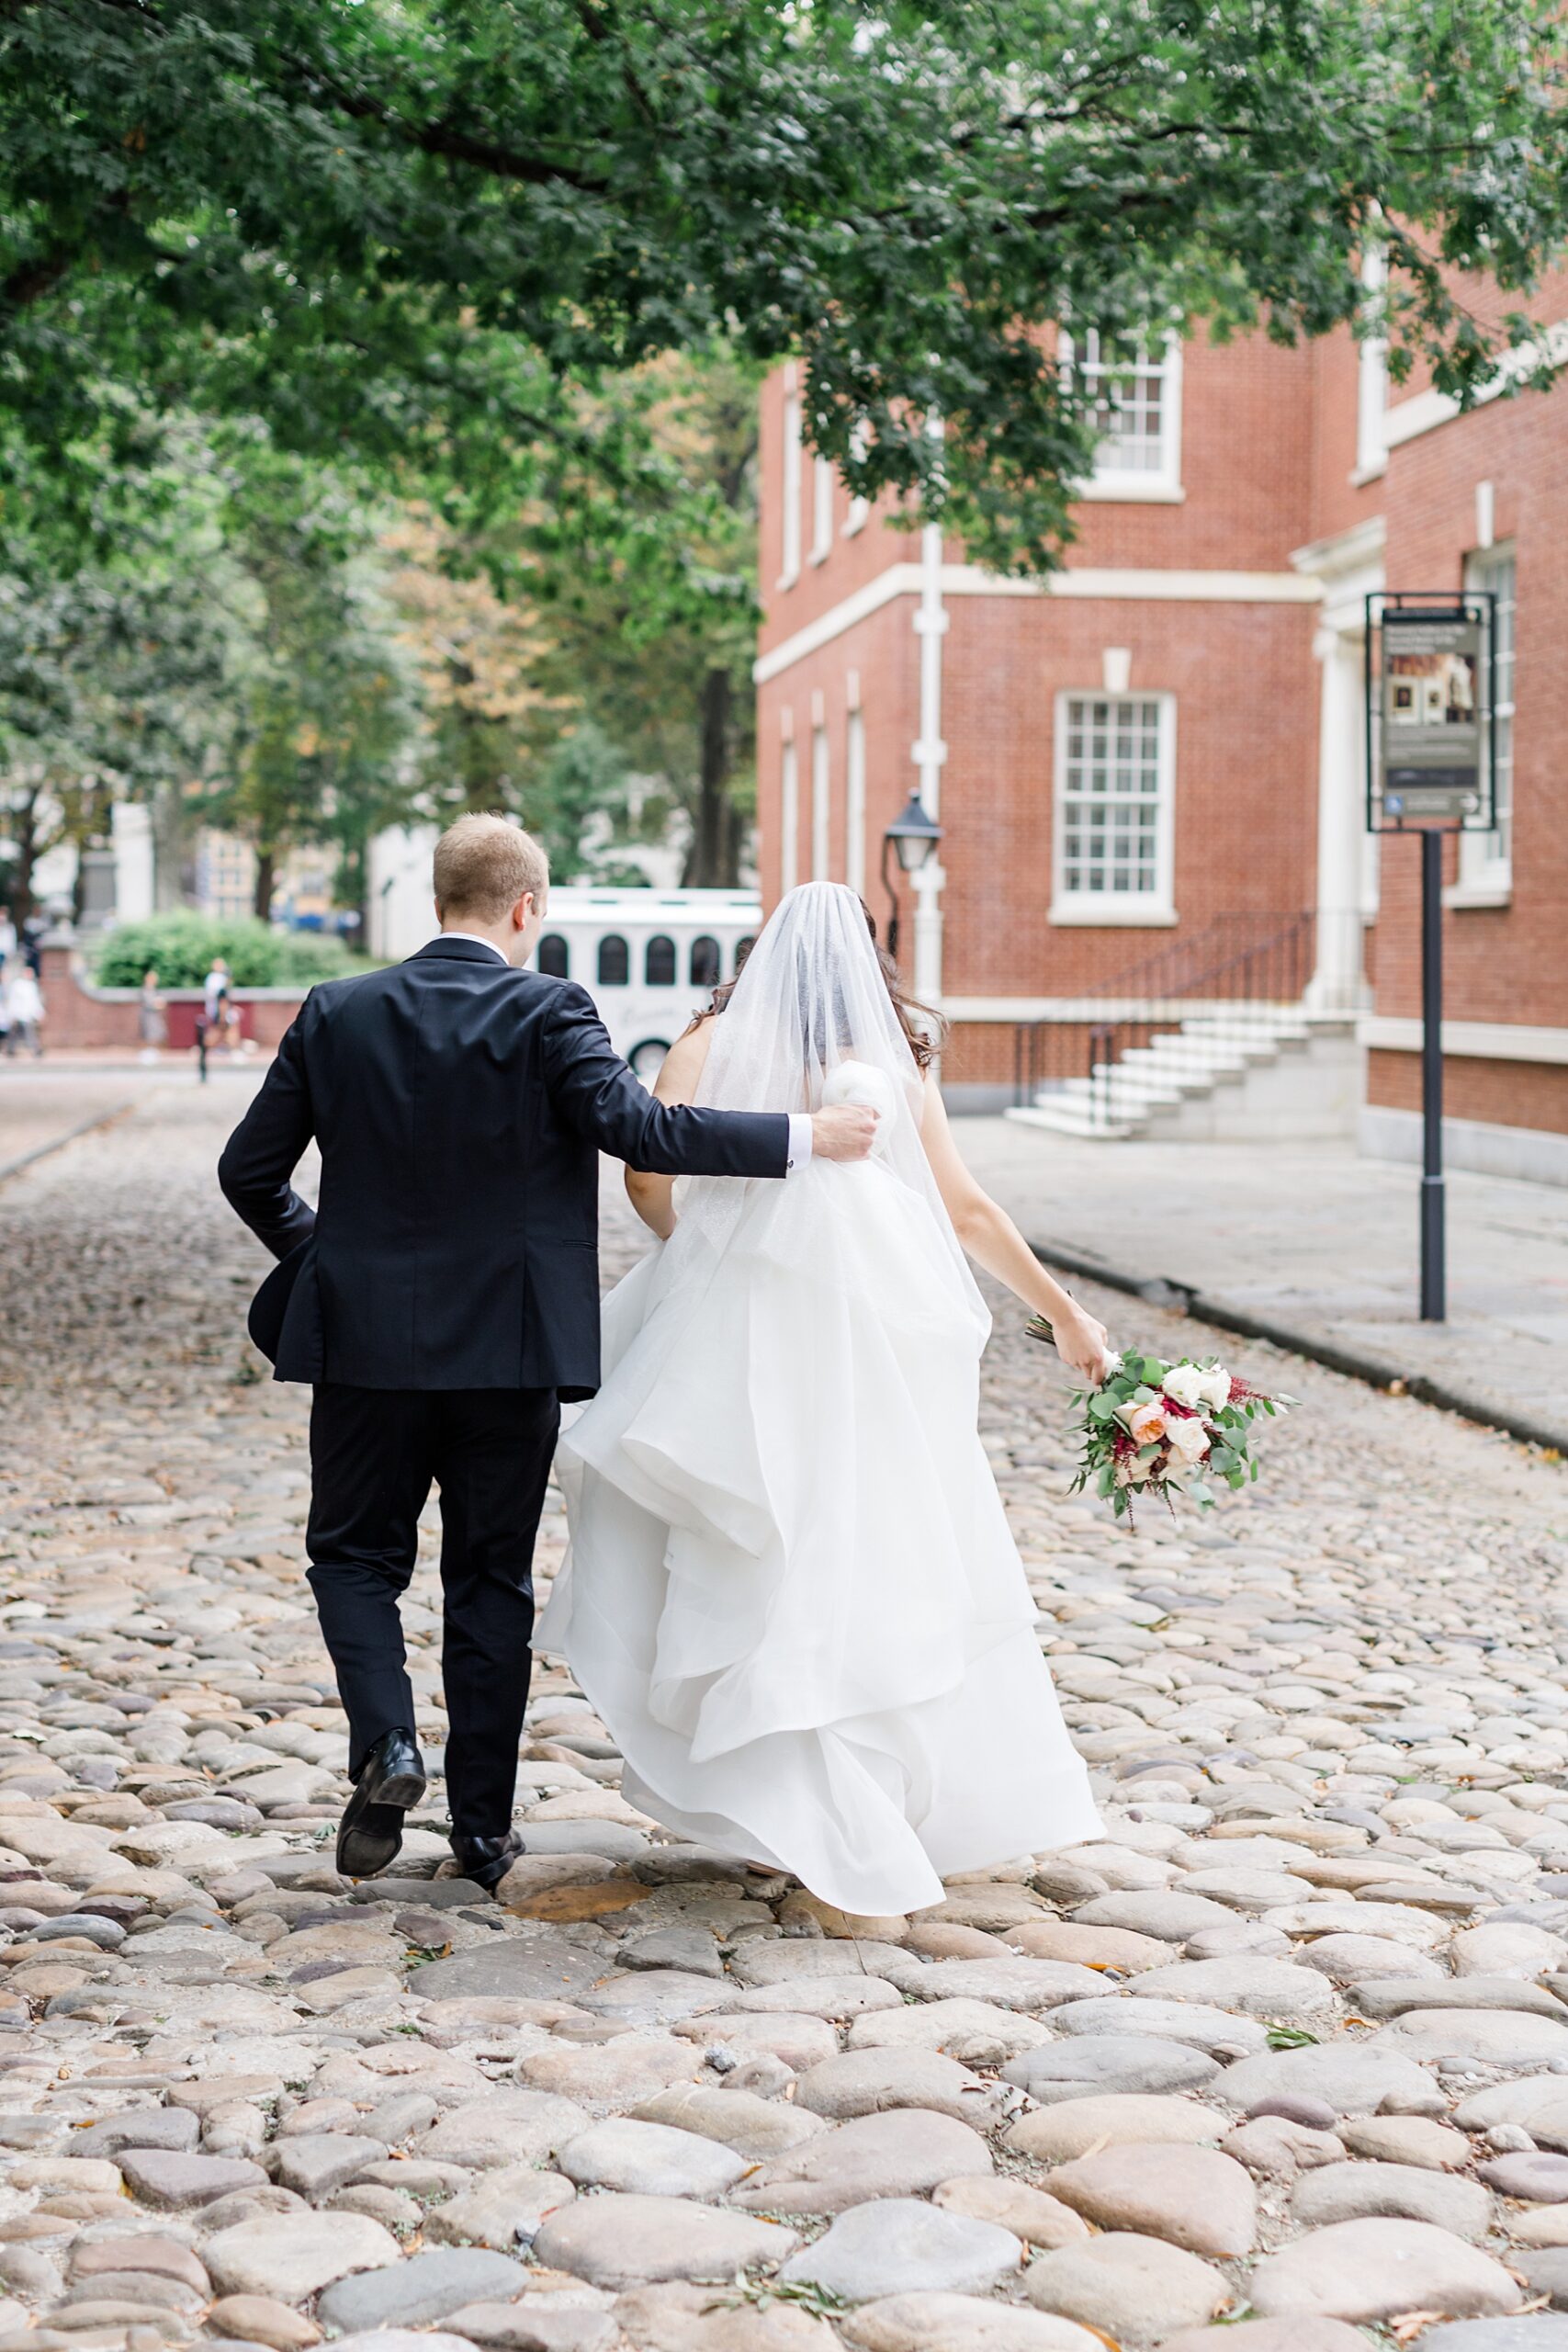 groom holds up bride's dress as they walk down cobblestone street